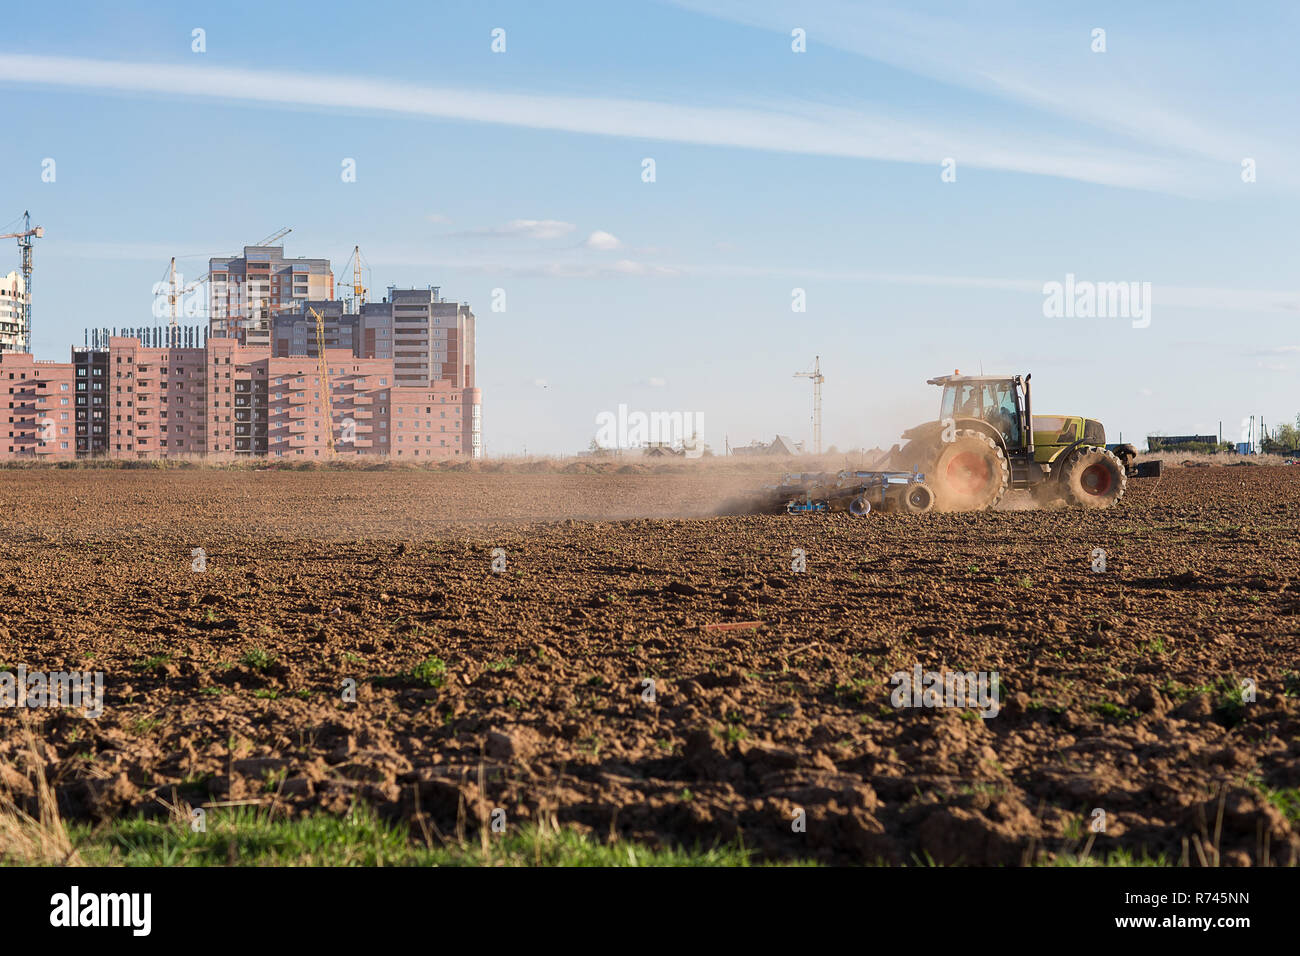 The industrialization of the vast expanses. Tractor plowing land on the background of houses under construction. Stock Photo